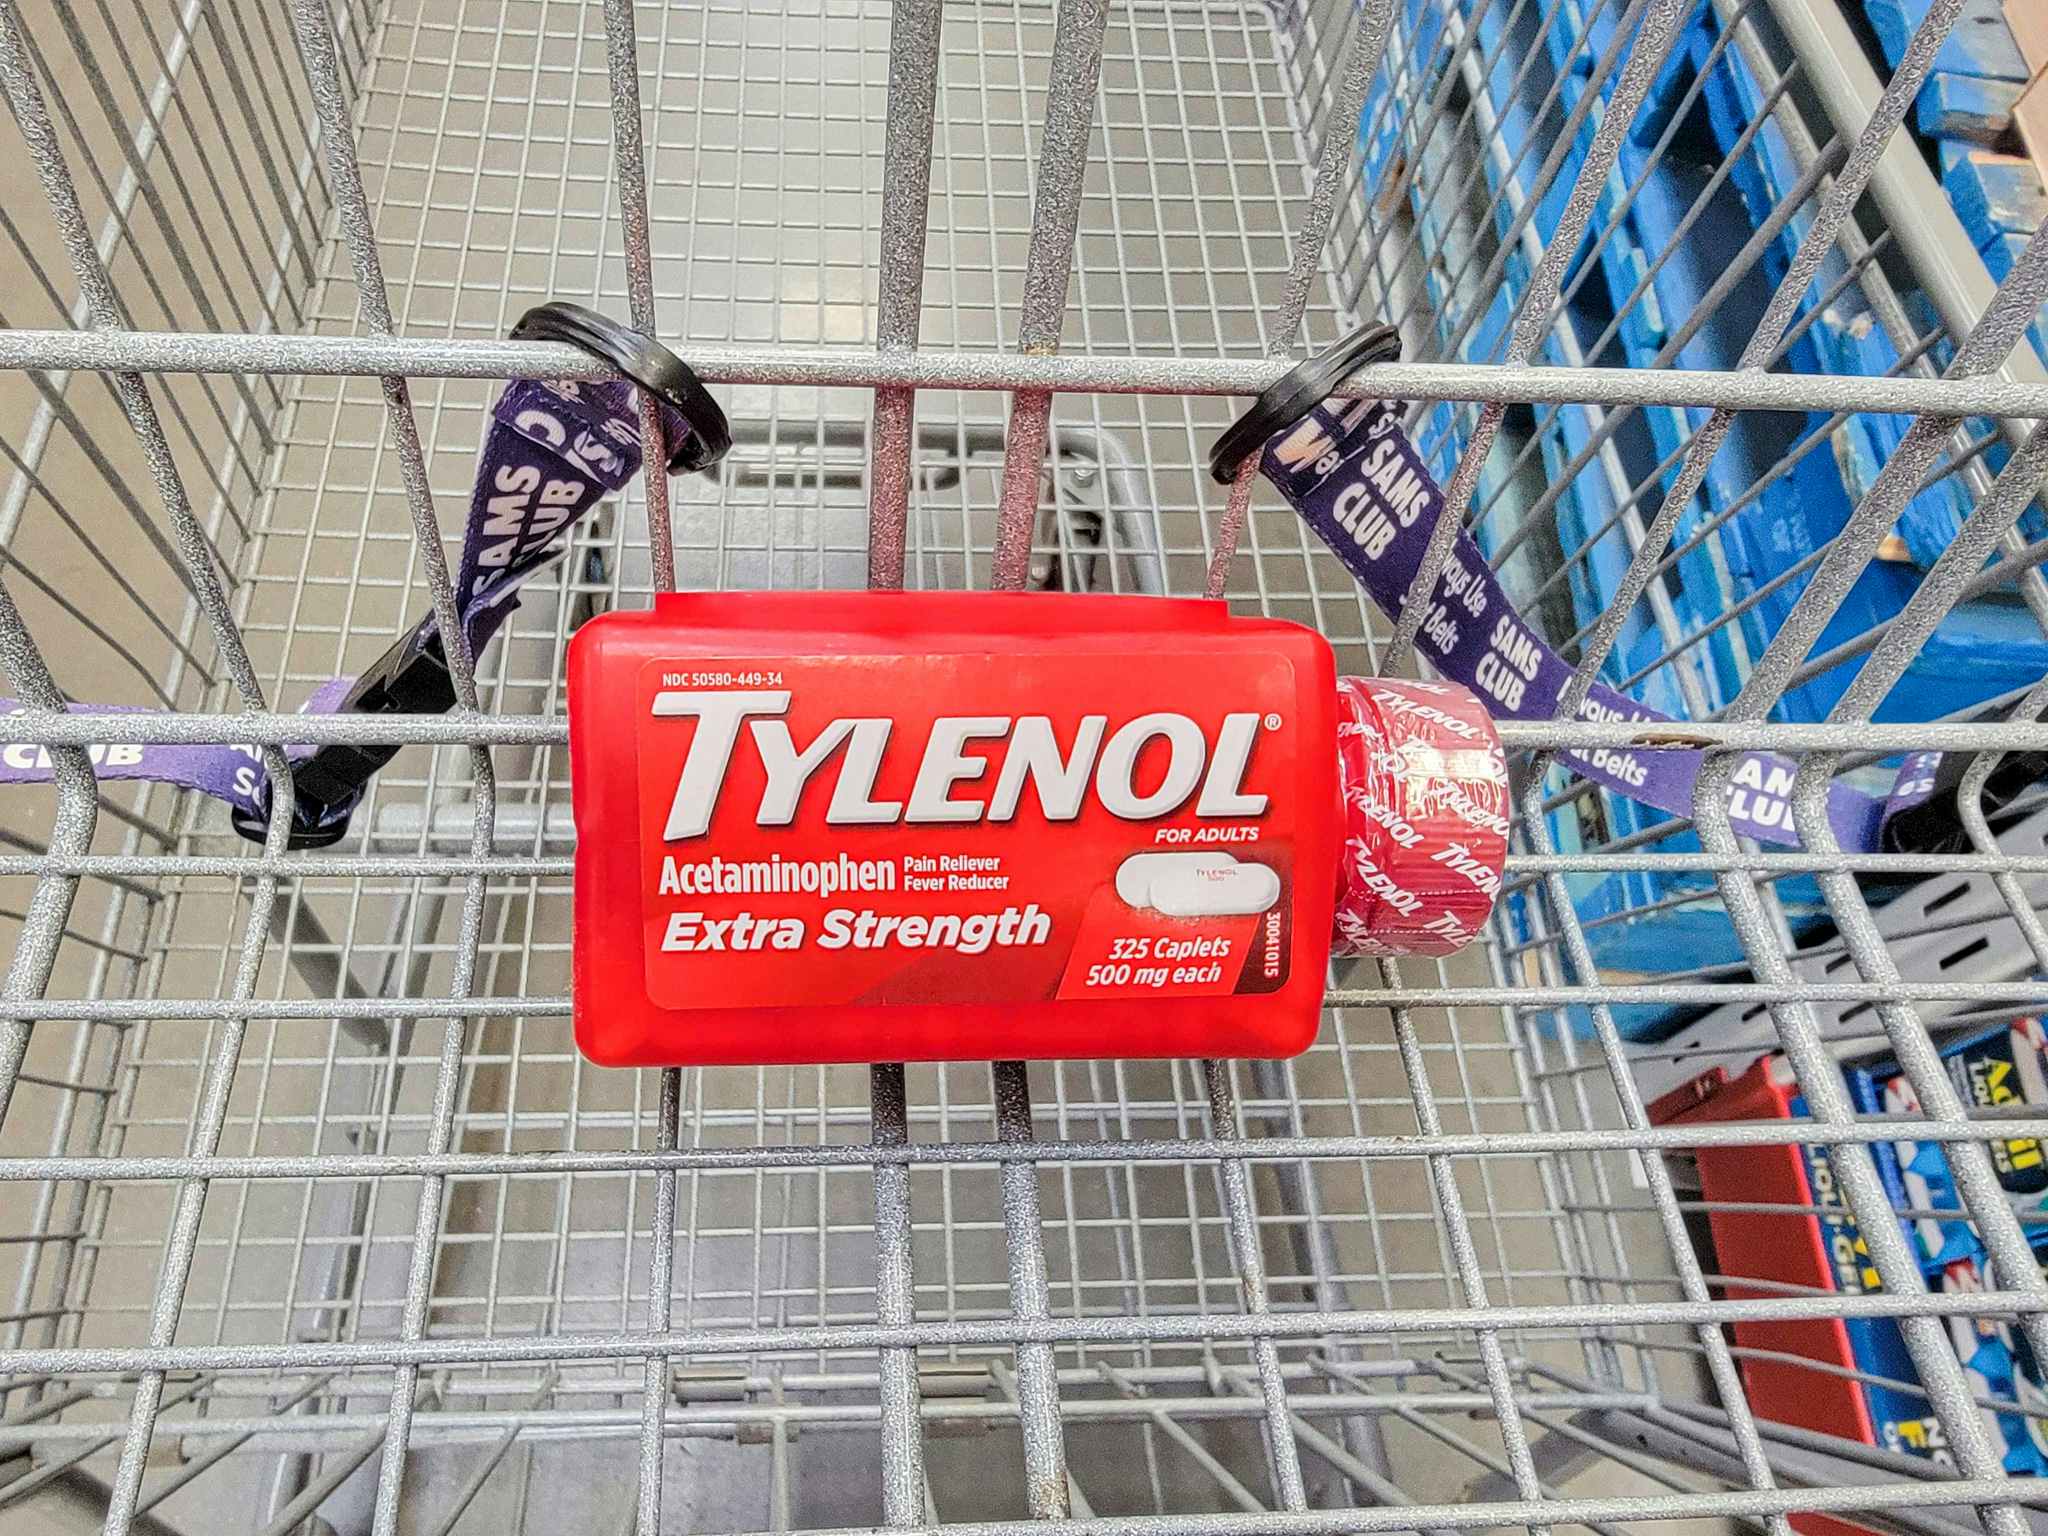 a bottle of 325 tylenol extra strength tabs in a cart